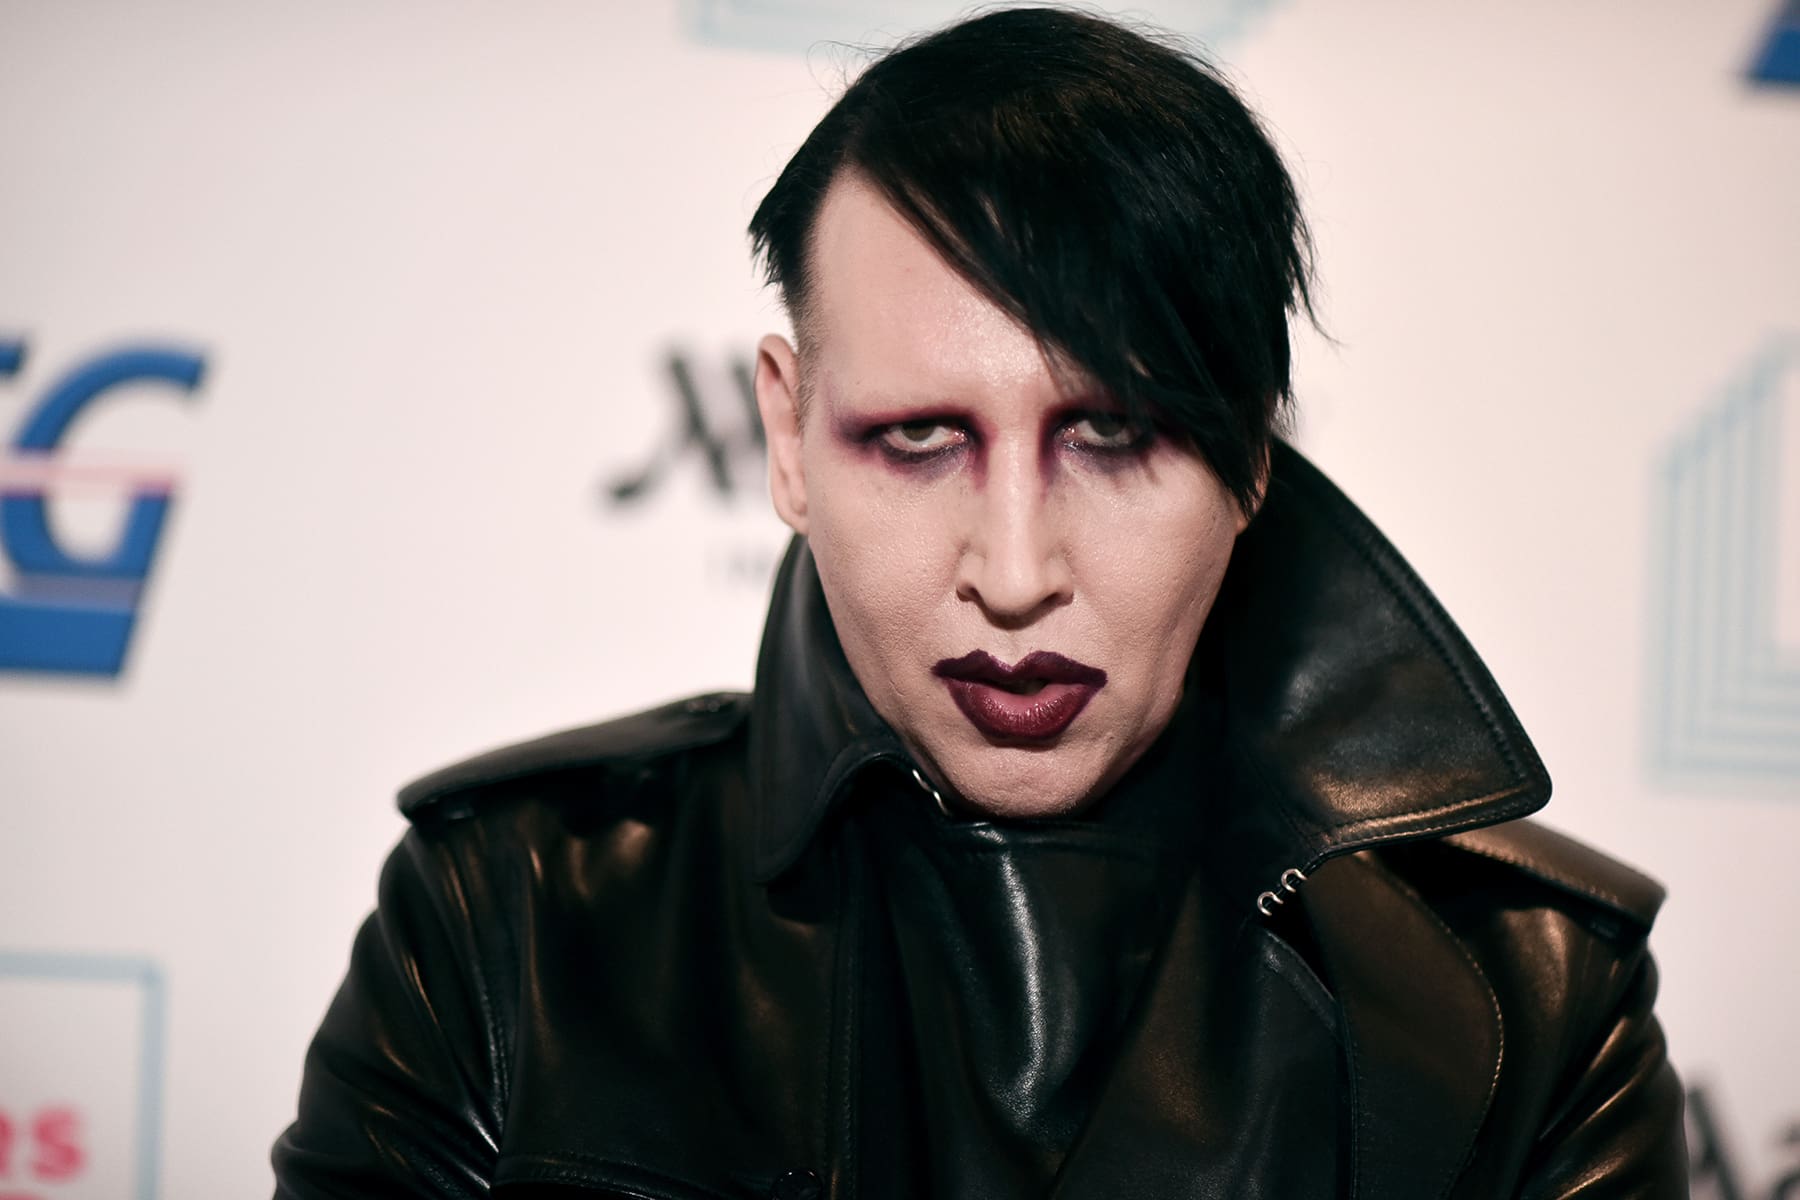 marilyn-manson-out-on-bail-after-turning-himself-in-to-the-police-over-gross-spitting-incident-involving-a-camerawoman